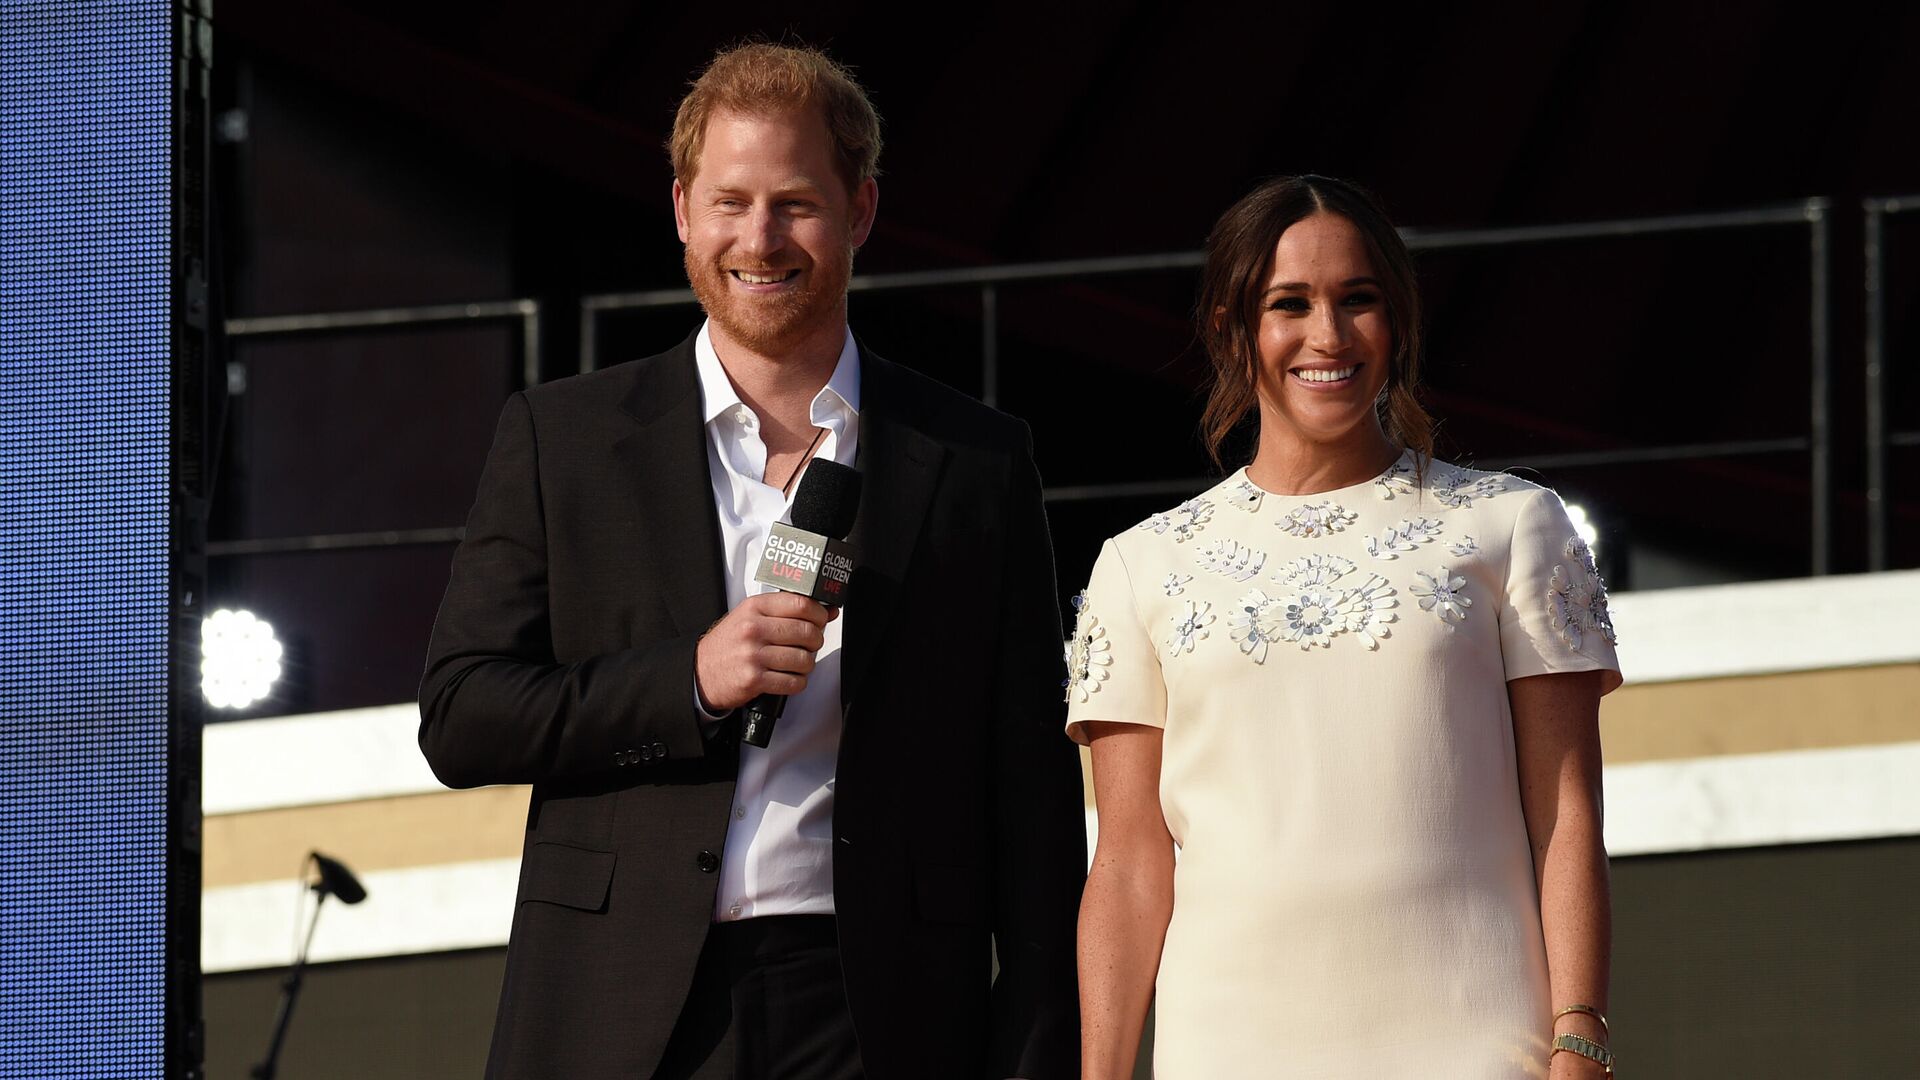 Prince Harry, the Duke of Sussex, left, and Meghan, the Duchess of Sussex speak at Global Citizen Live in Central Park on Saturday, Sept. 25, 2021, in New York. - Sputnik International, 1920, 24.03.2022